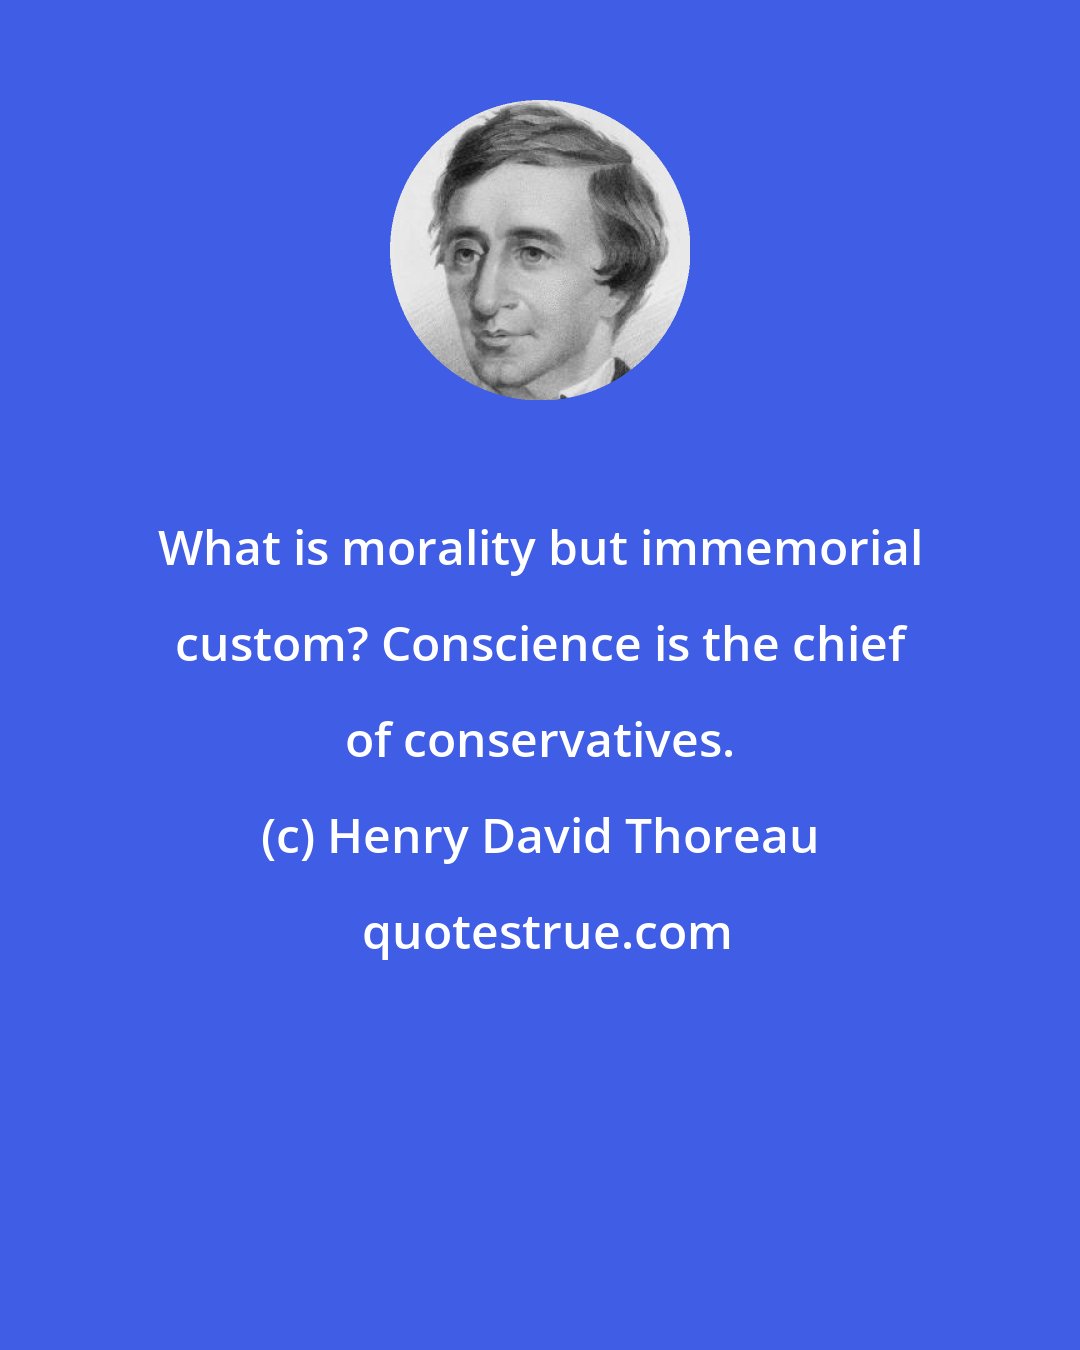 Henry David Thoreau: What is morality but immemorial custom? Conscience is the chief of conservatives.